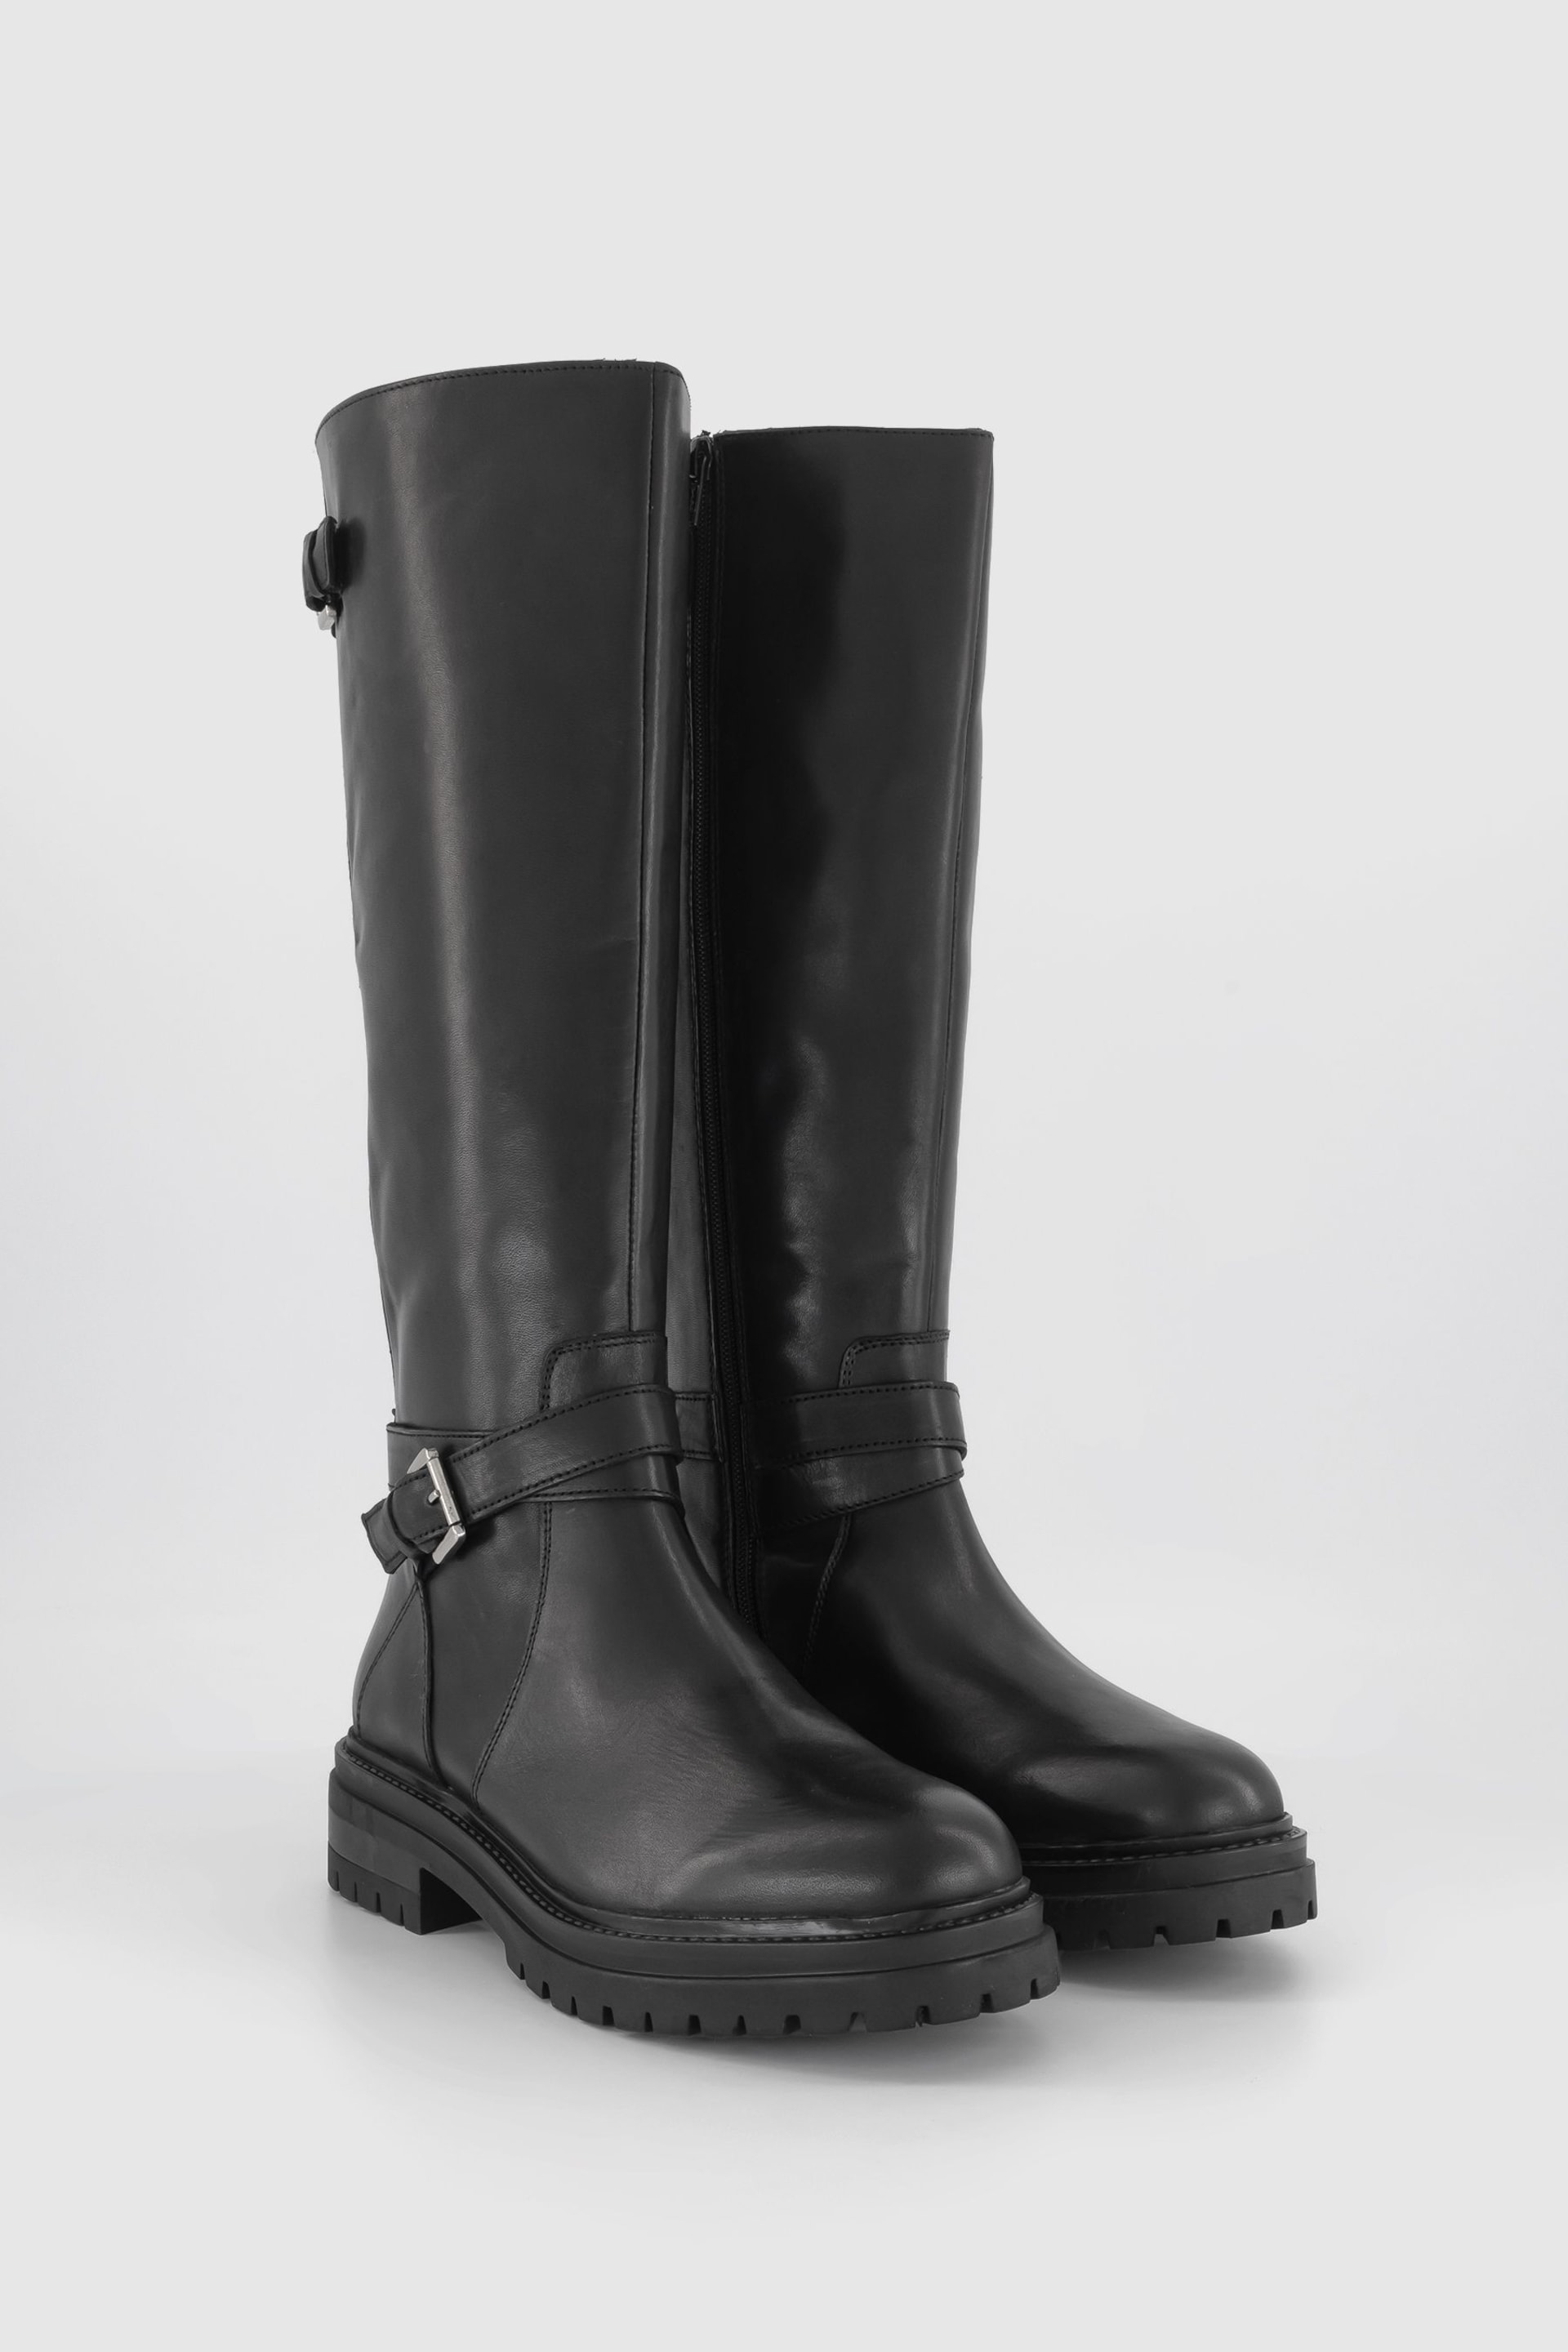 Office Black Leather Buckle Strap Krissy Knee High Rider Boots - Image 3 of 5